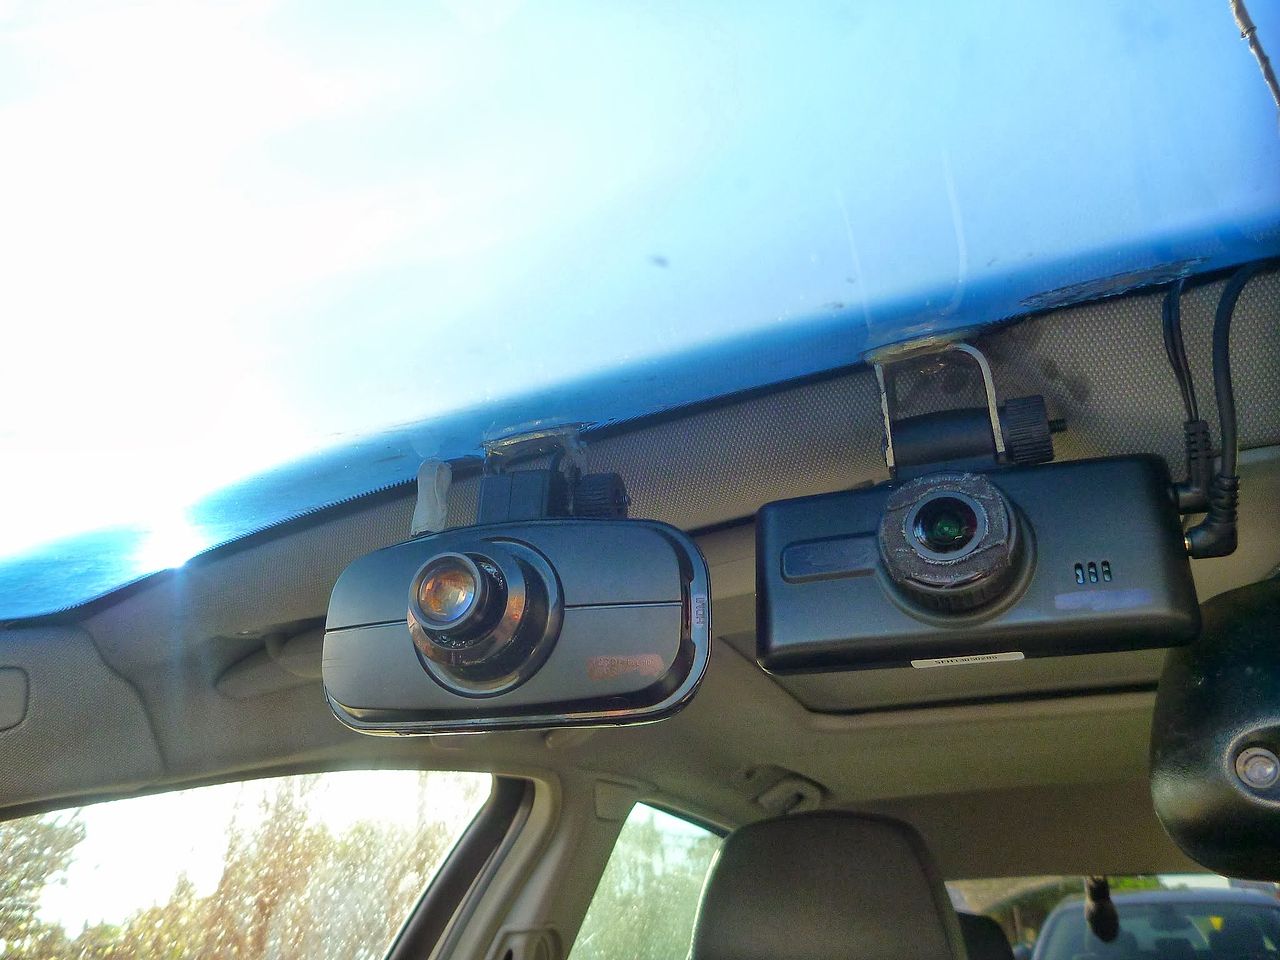 This image shows the Car Dashcam in sunlight.